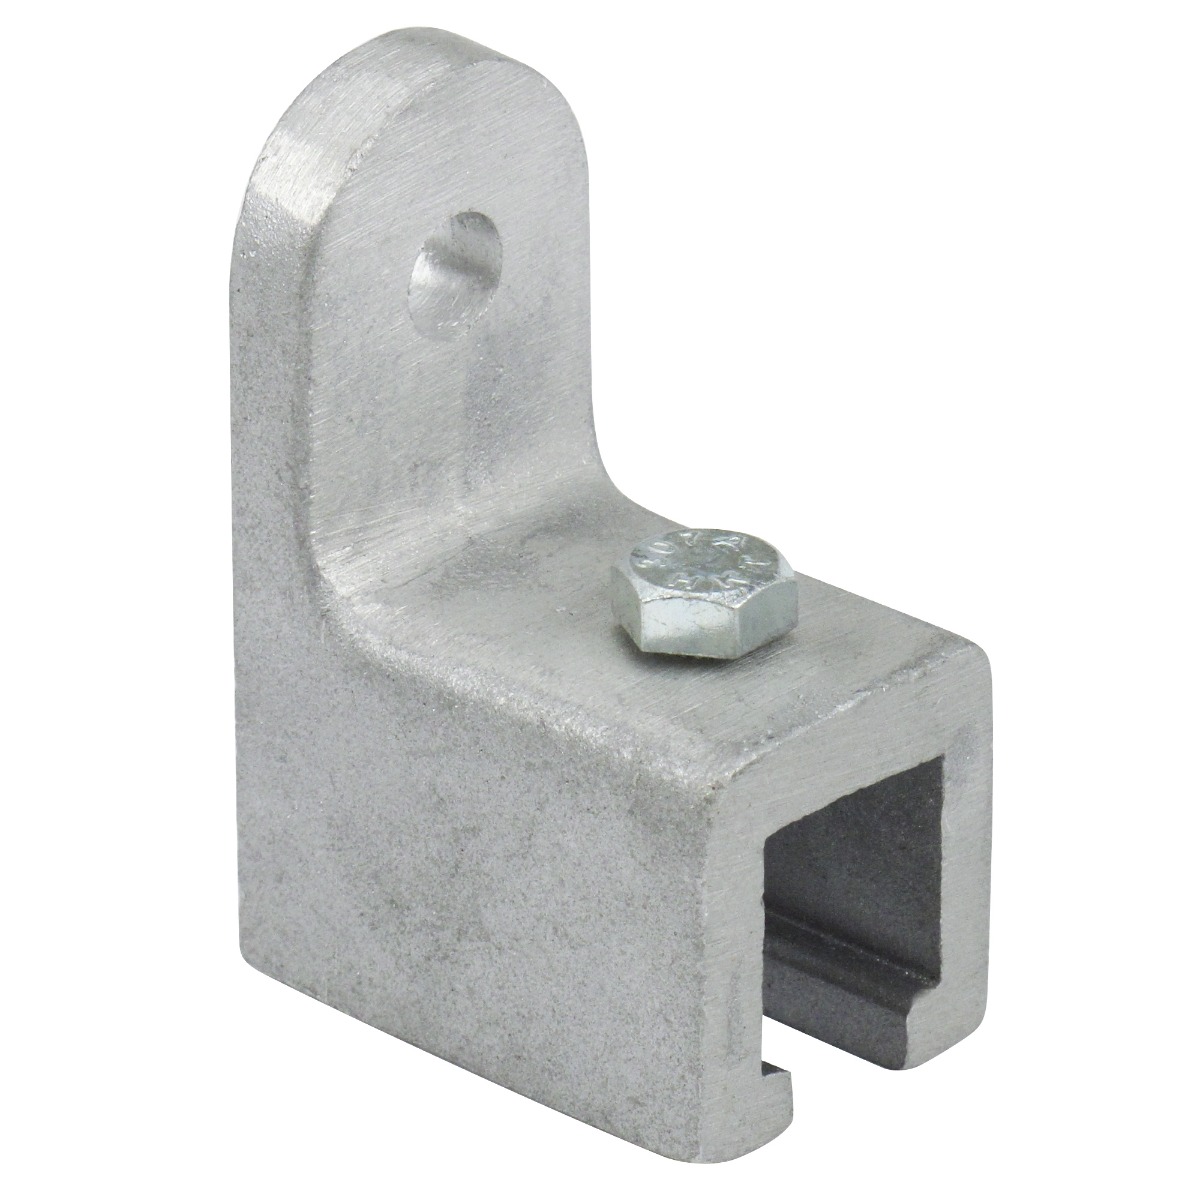 Poly Broomhead Alloy Hold Bracket